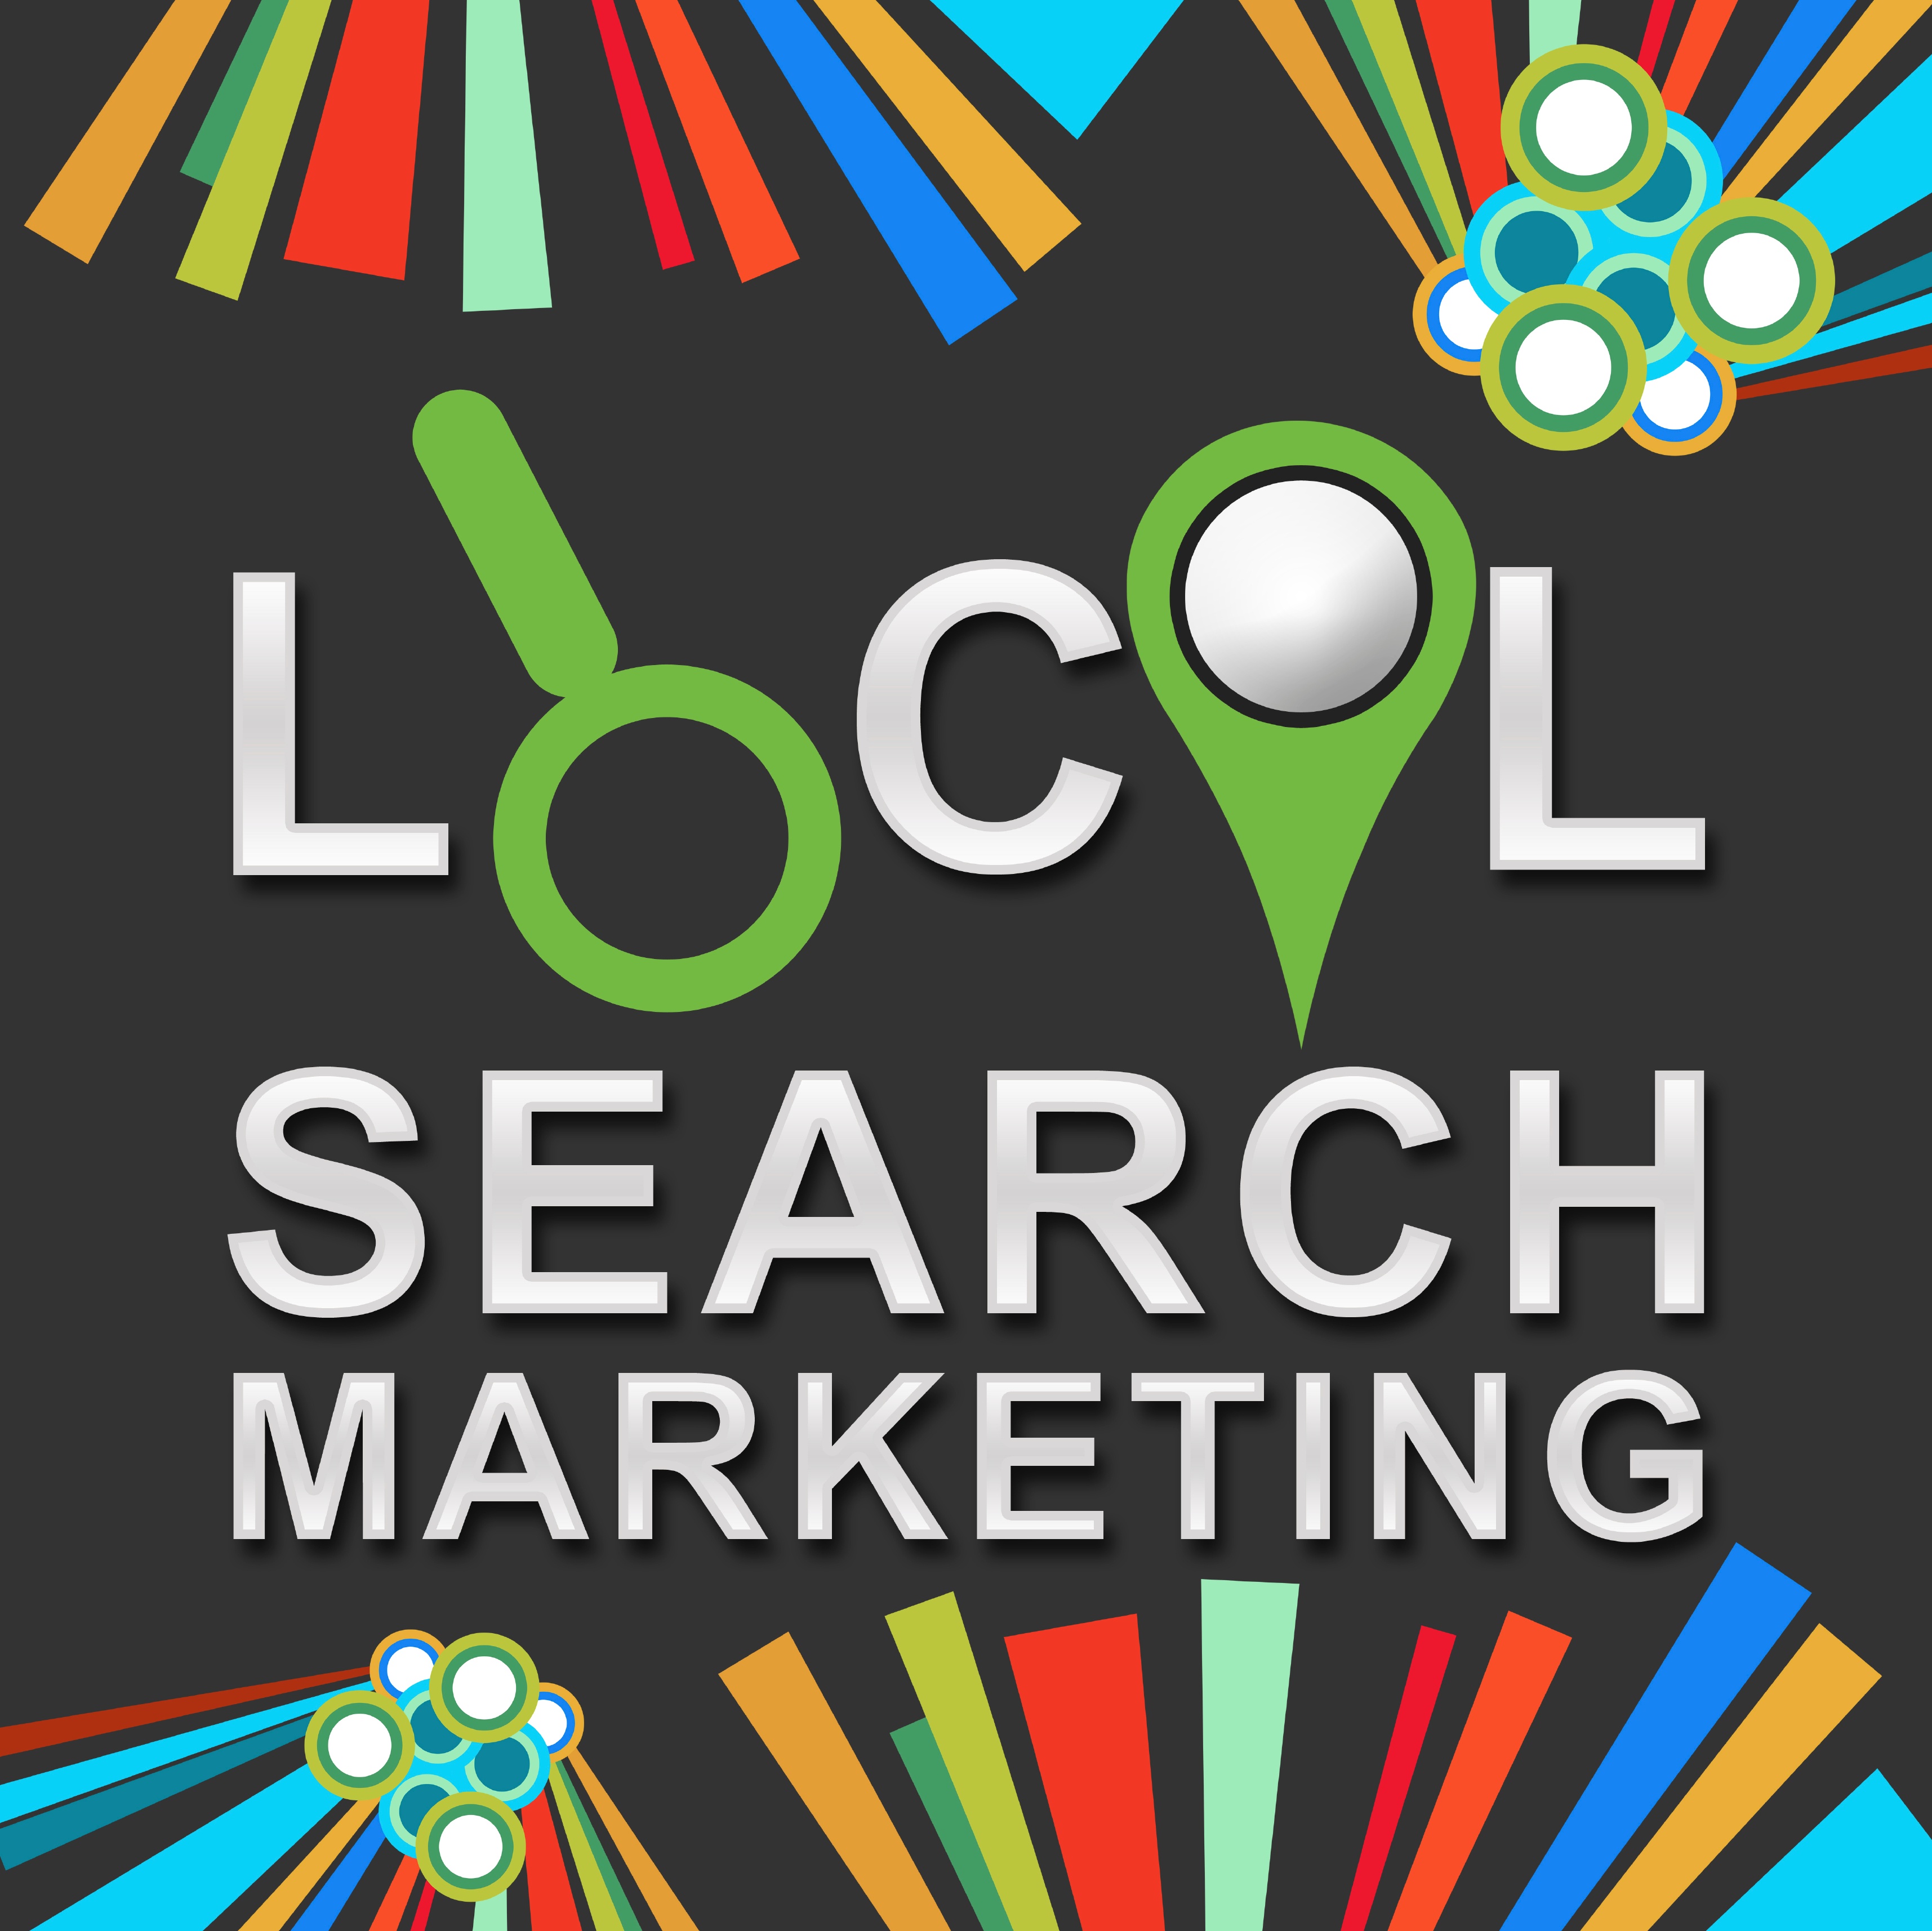 7 Tips To Improve Local Search Optimization